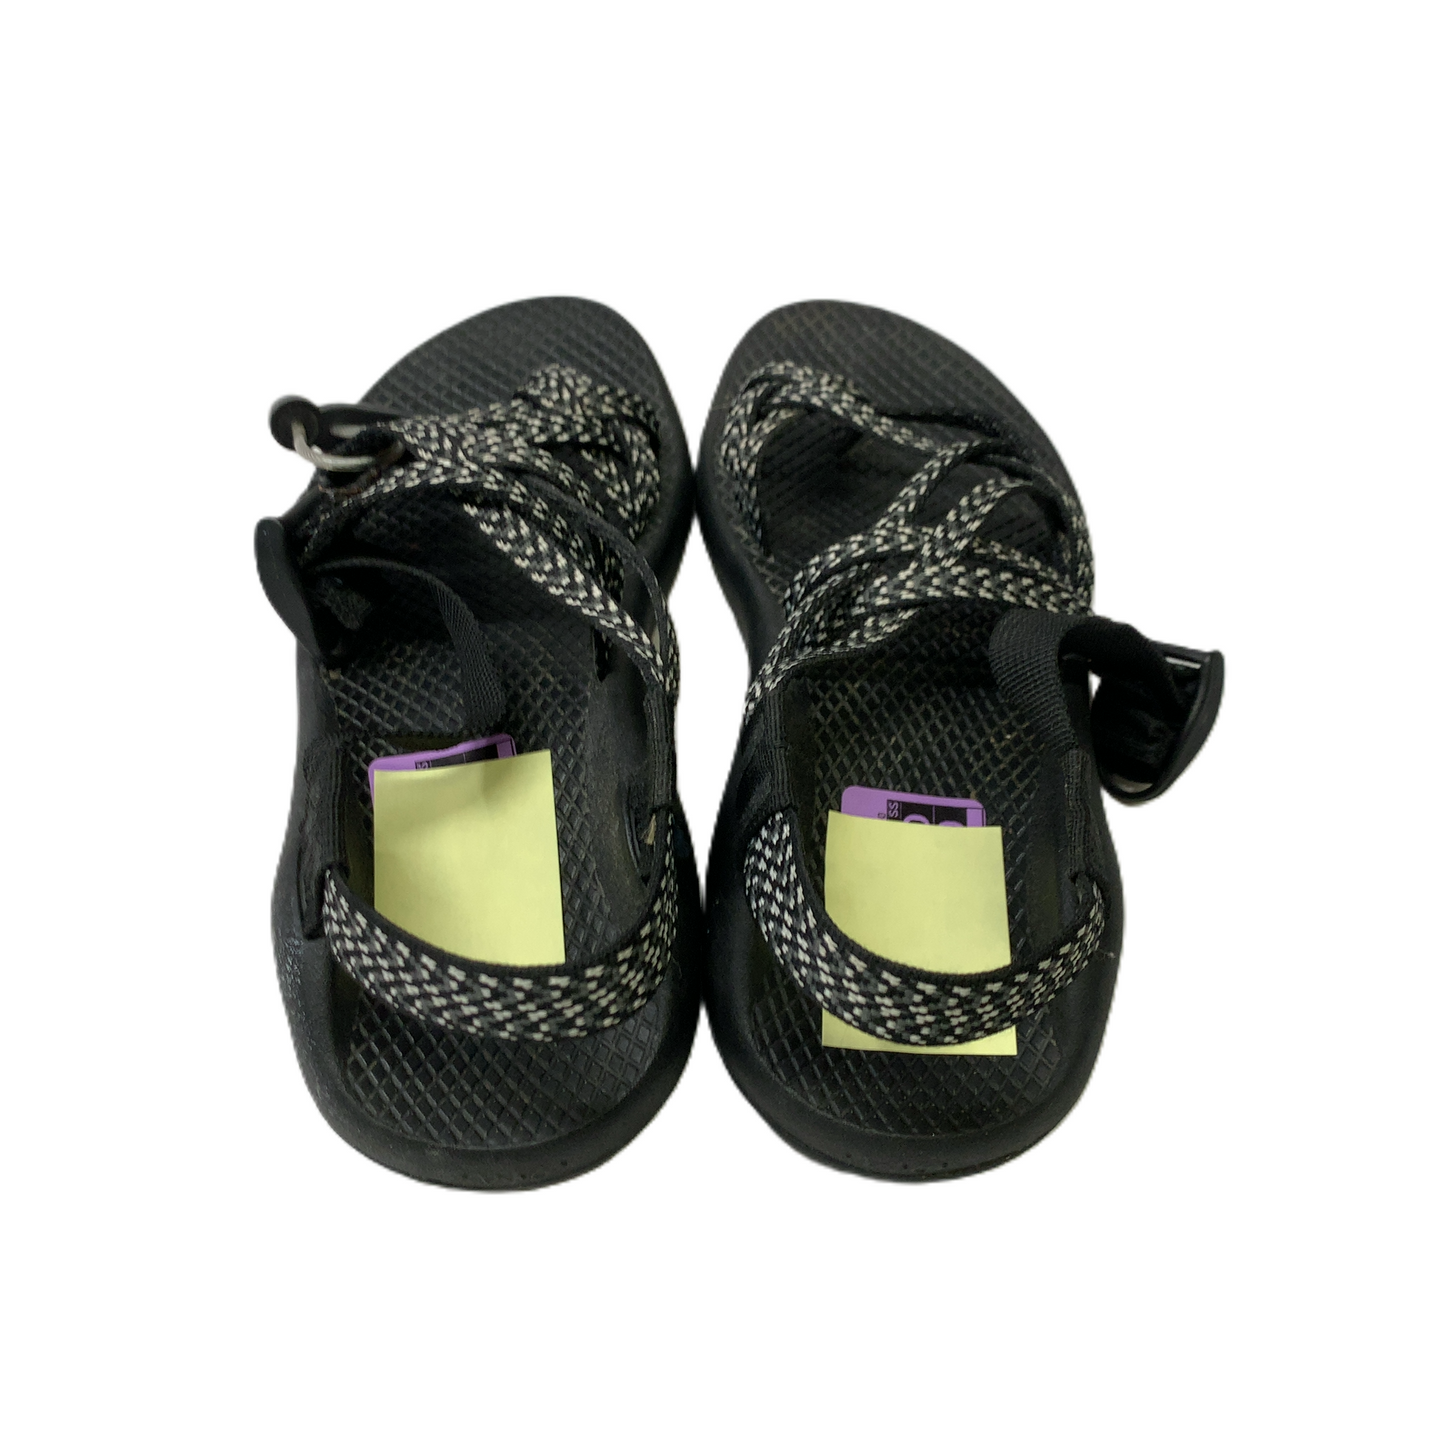 Sandals Flip Flops By Chacos  Size: 6